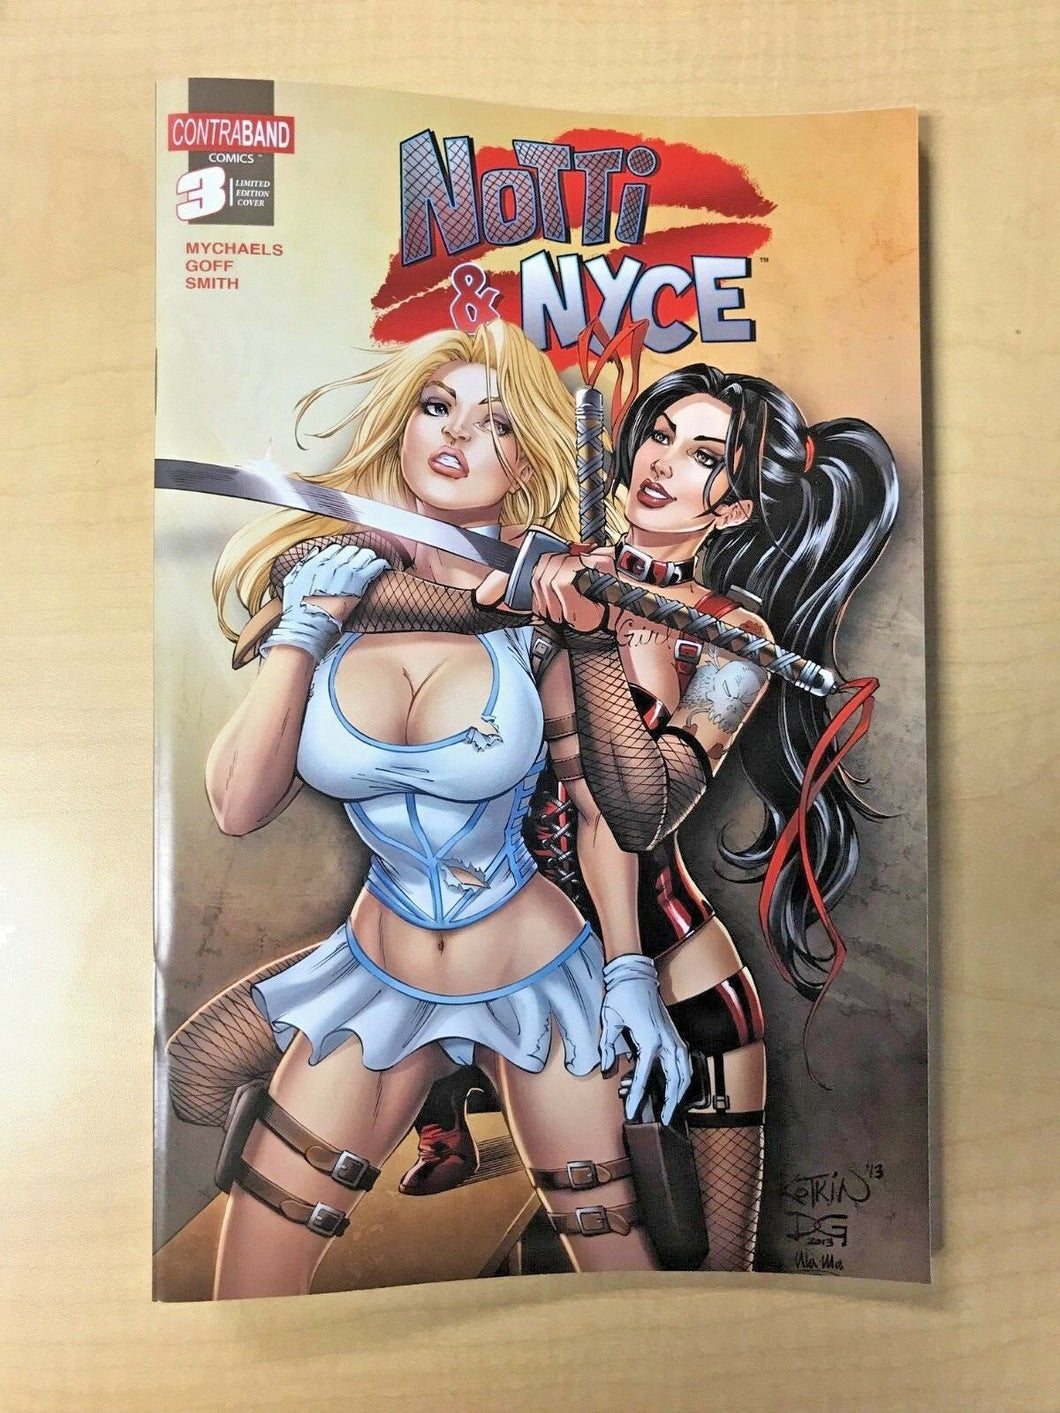 Notti & Nyce #3 NAUGHTY Variant Cover by ALEX KOTKIN Contraband Comics SOLD OUT